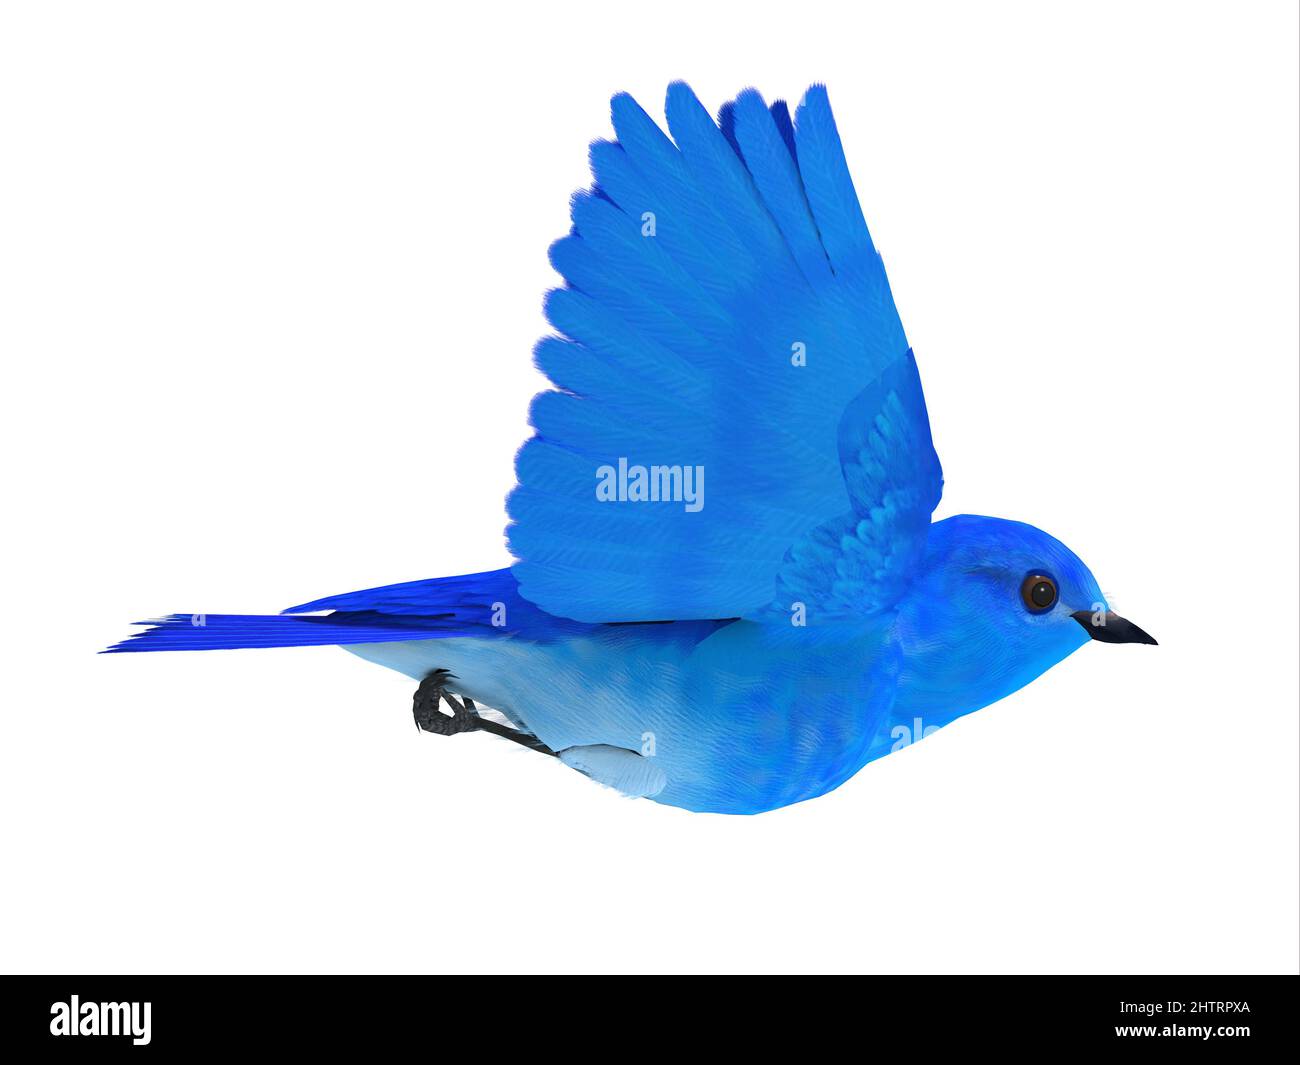 Bluebird Of Happiness High Resolution Stock Photography and Images 